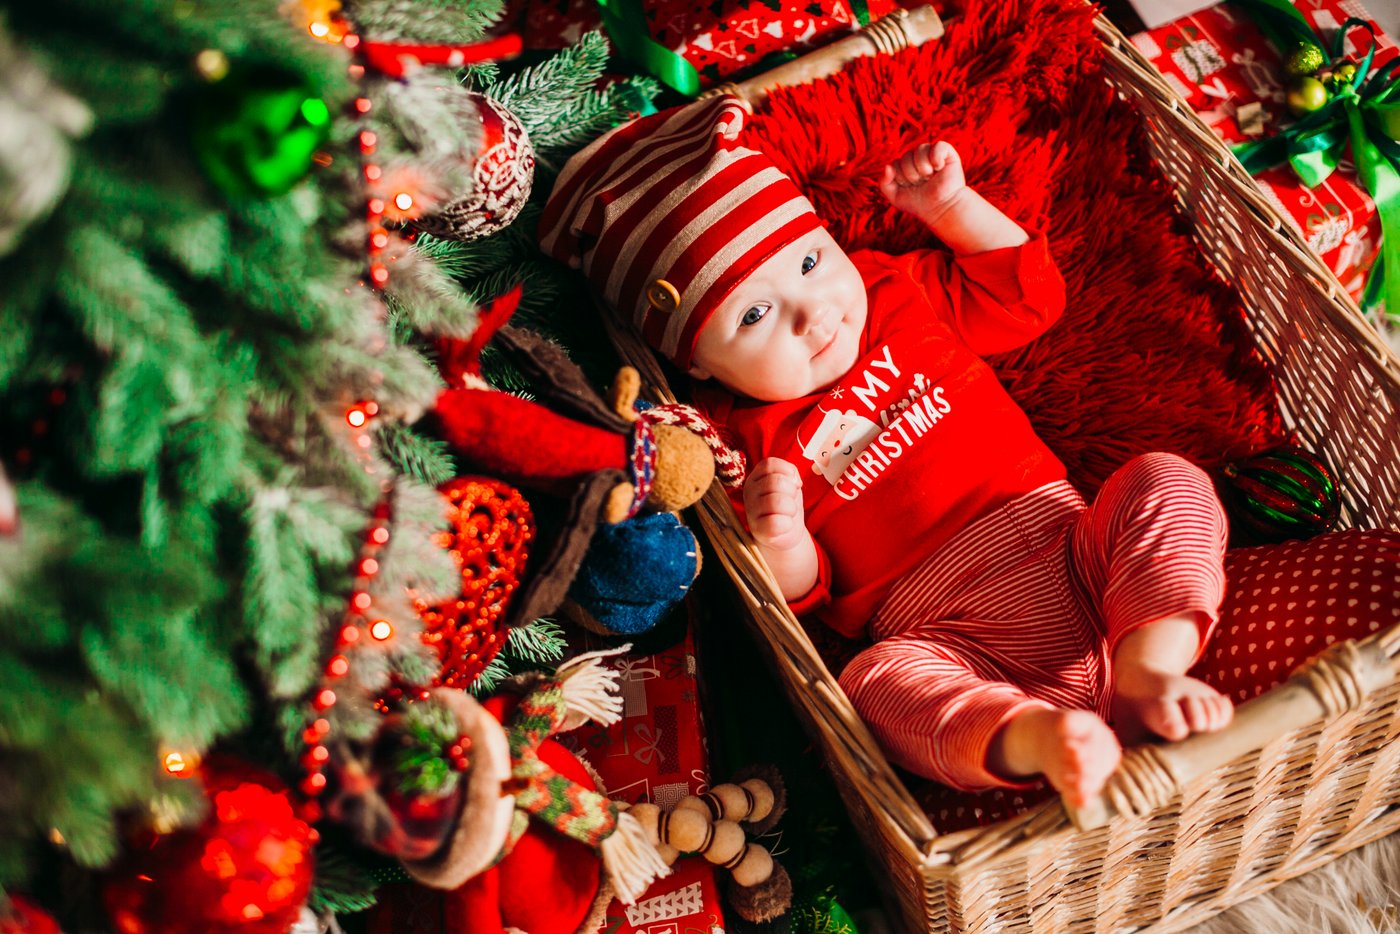 Cute Christmas baby in a basket